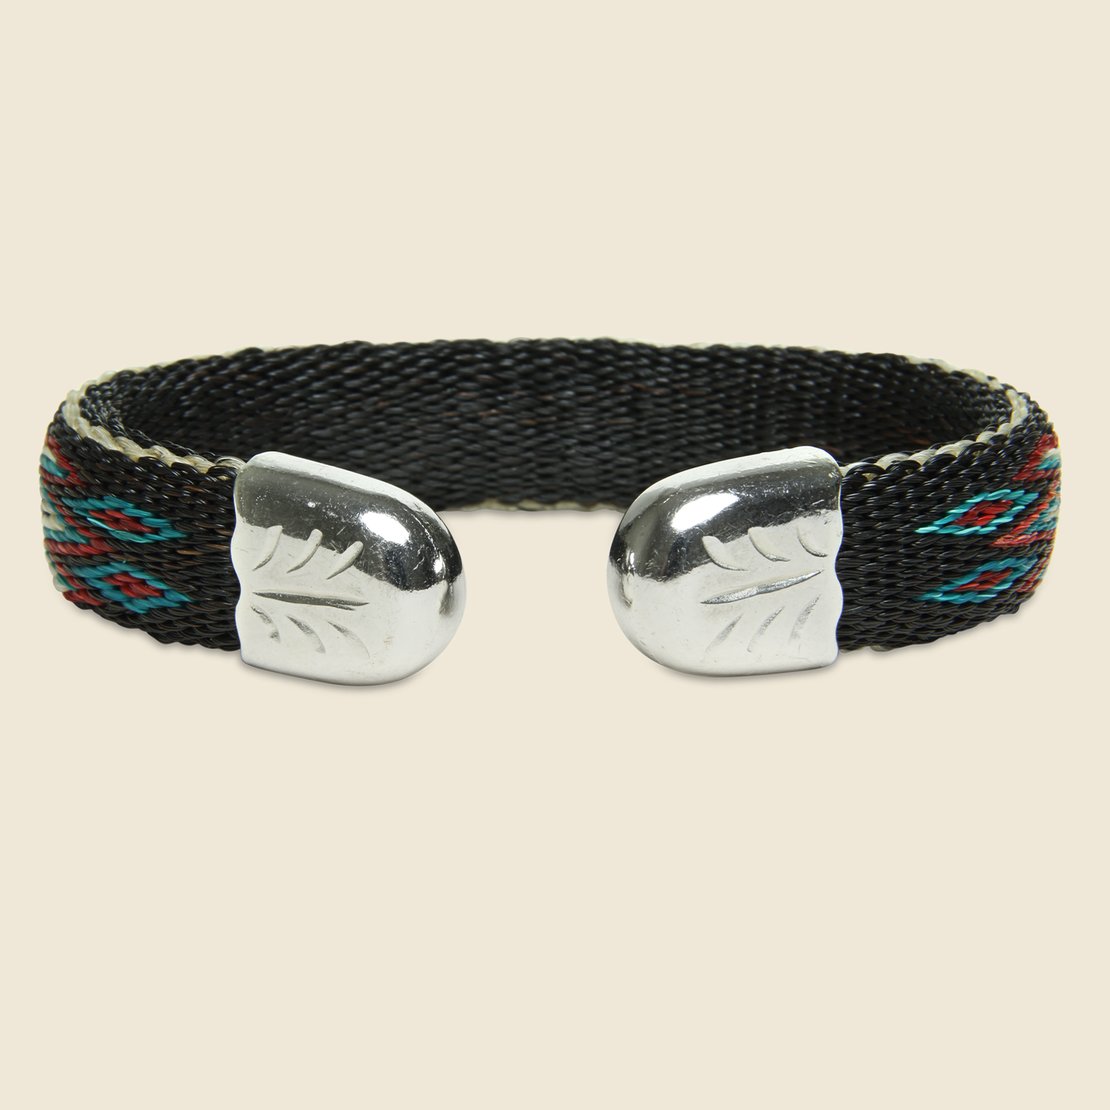 Bendable Horsehair Bracelet - Black/Multi - Chamula - STAG Provisions - Accessories - Cuffs